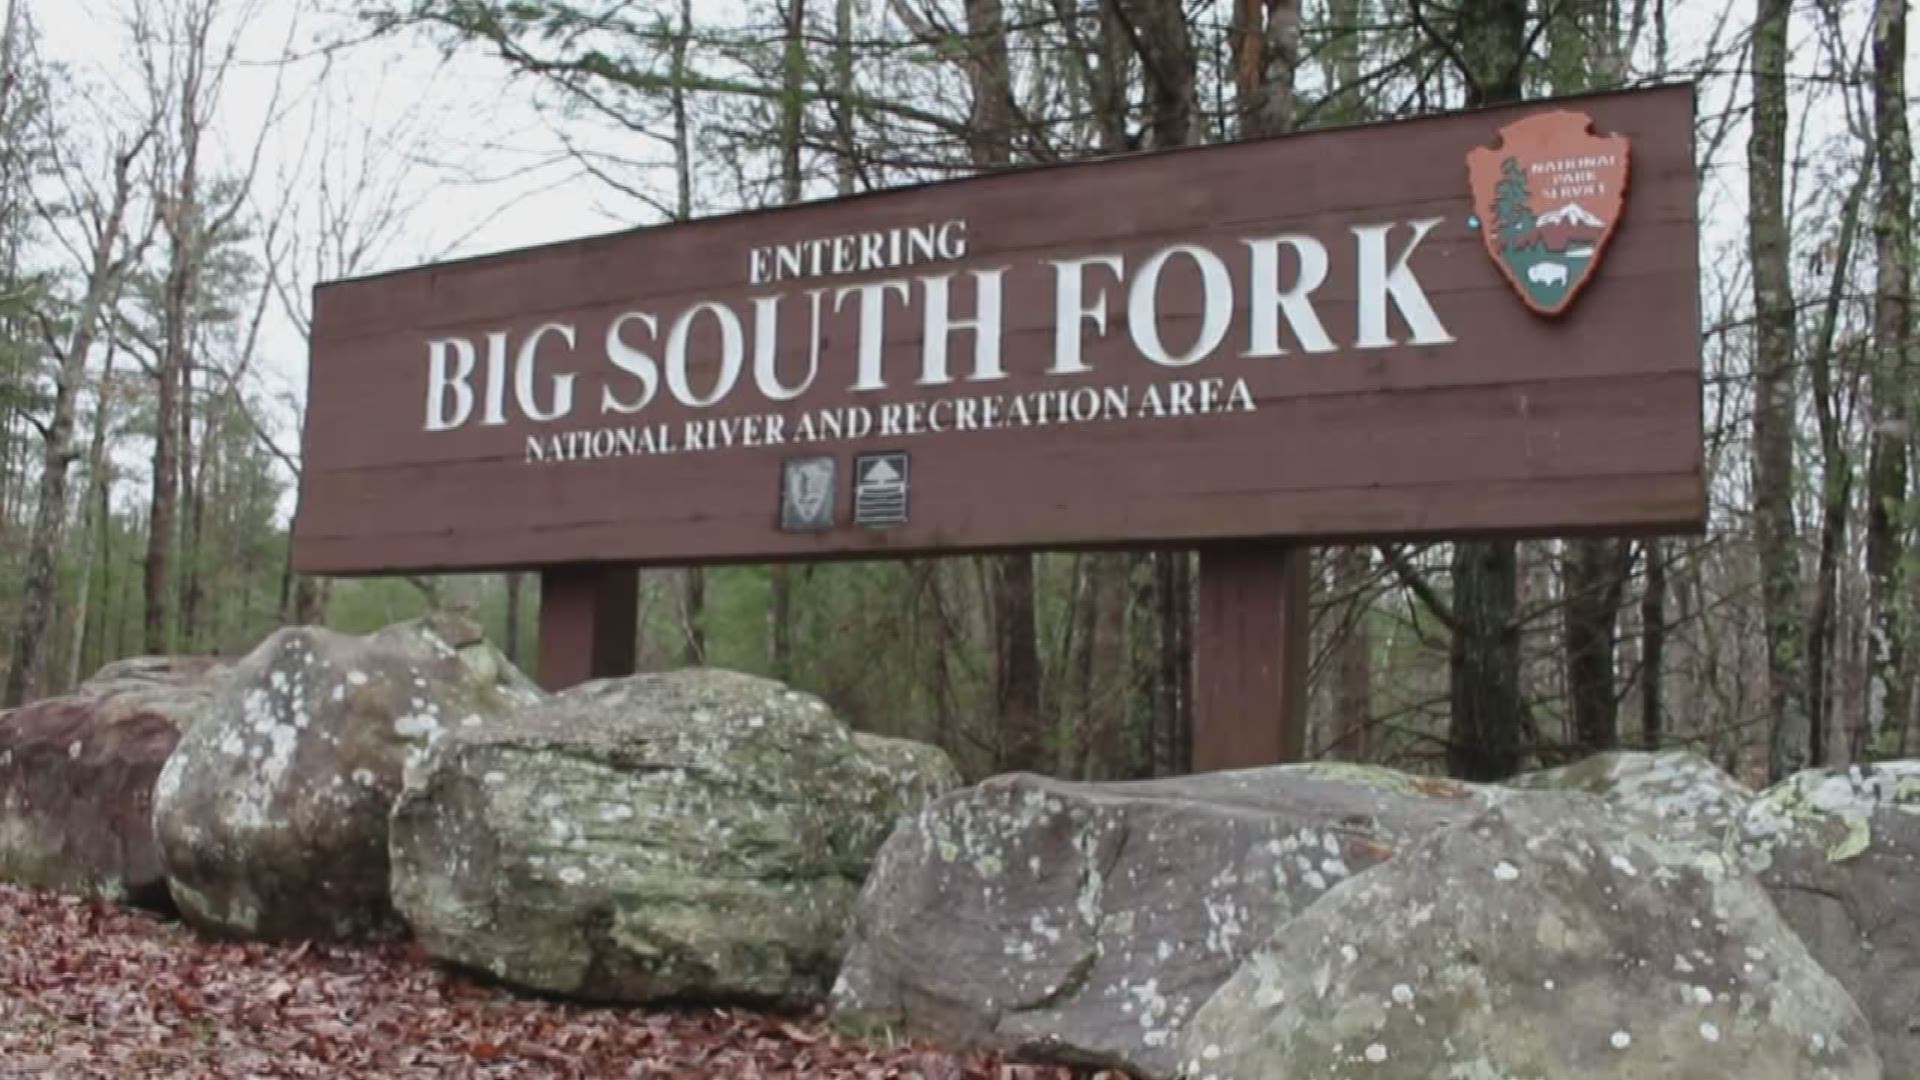 Parks run by the National Park Service in East Tennessee are feeling the impact as the government shutdown continues.